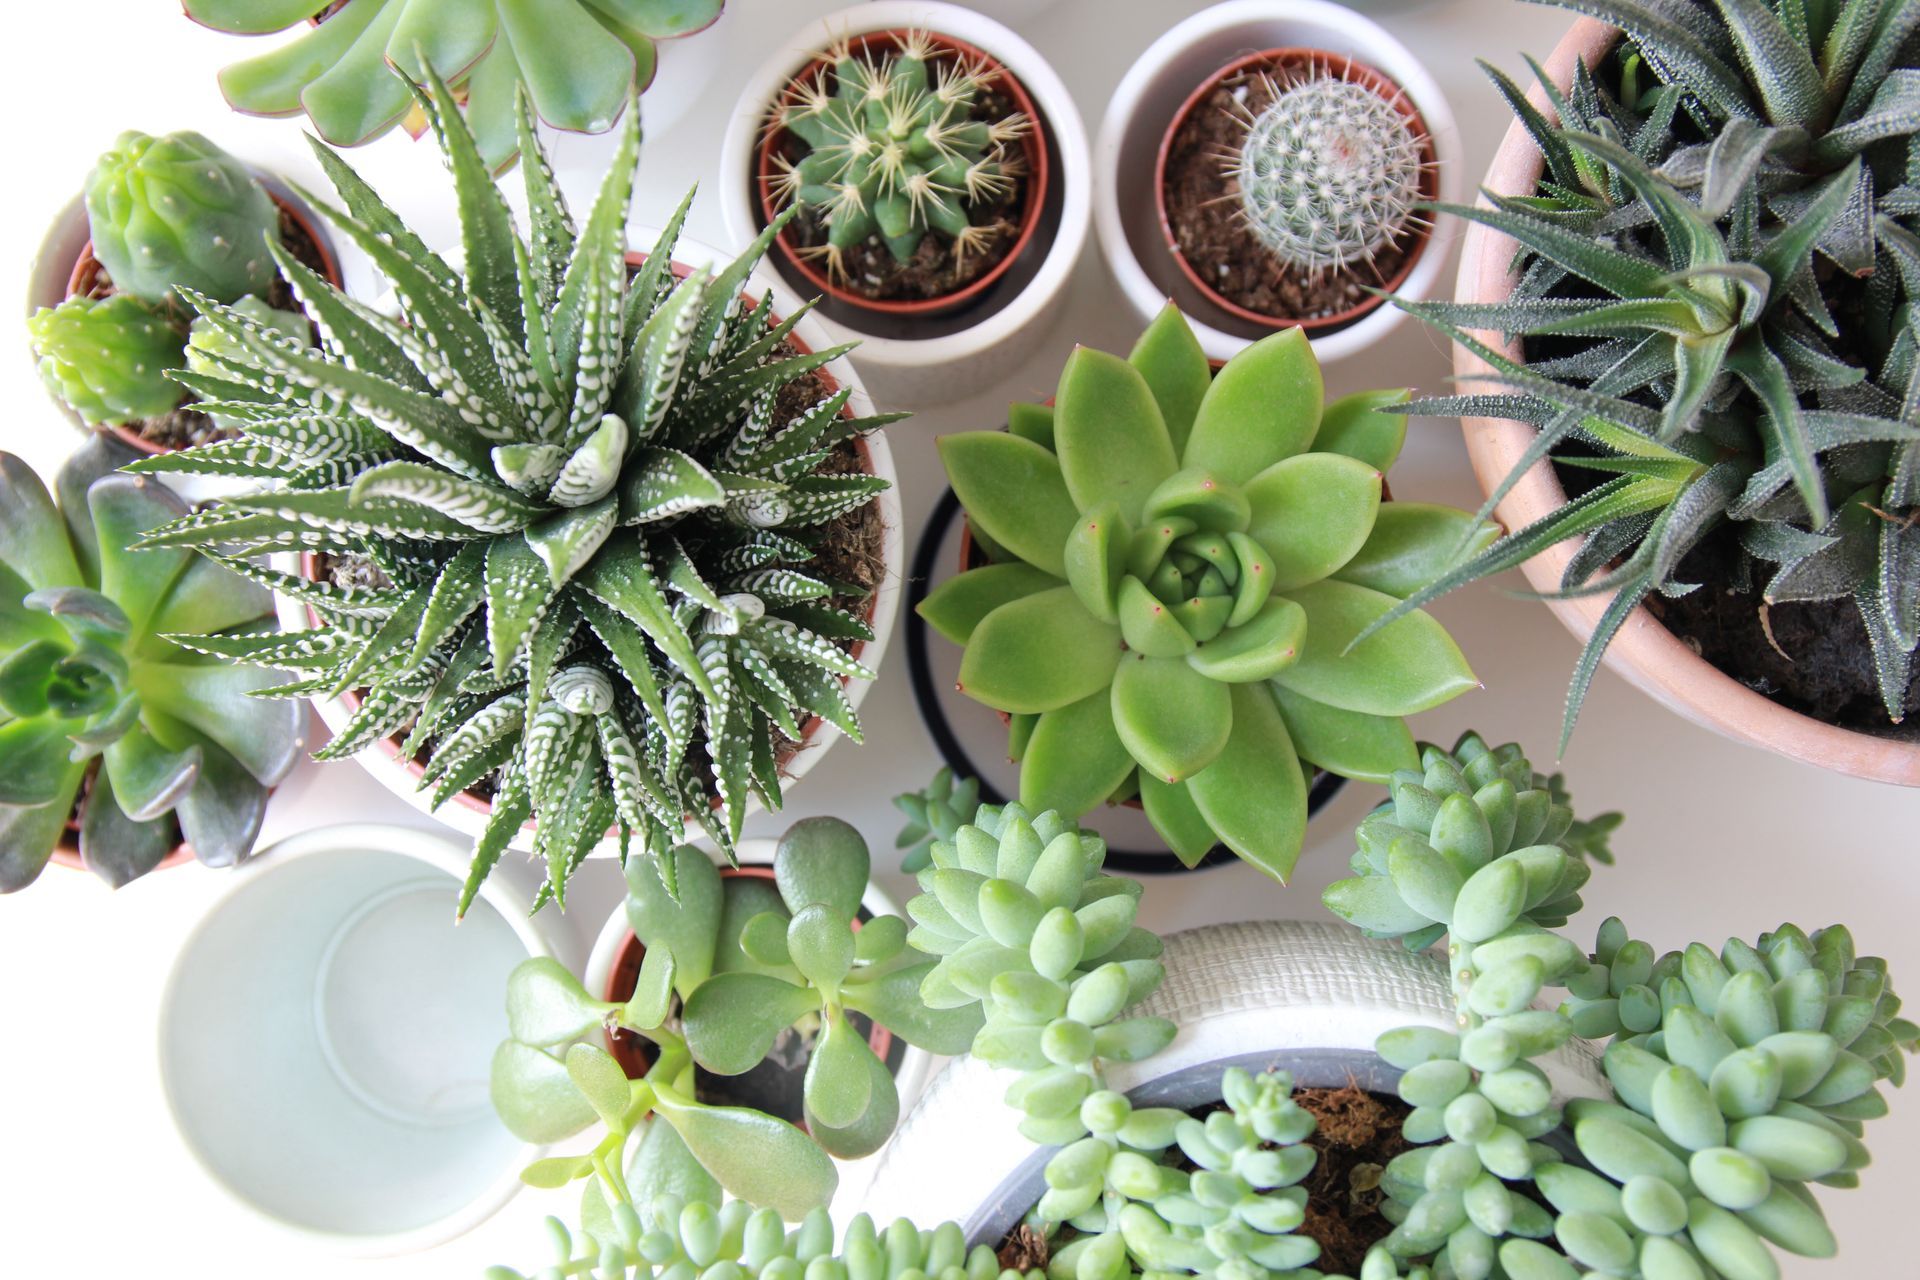 There are many different types of succulents in pots on the table.